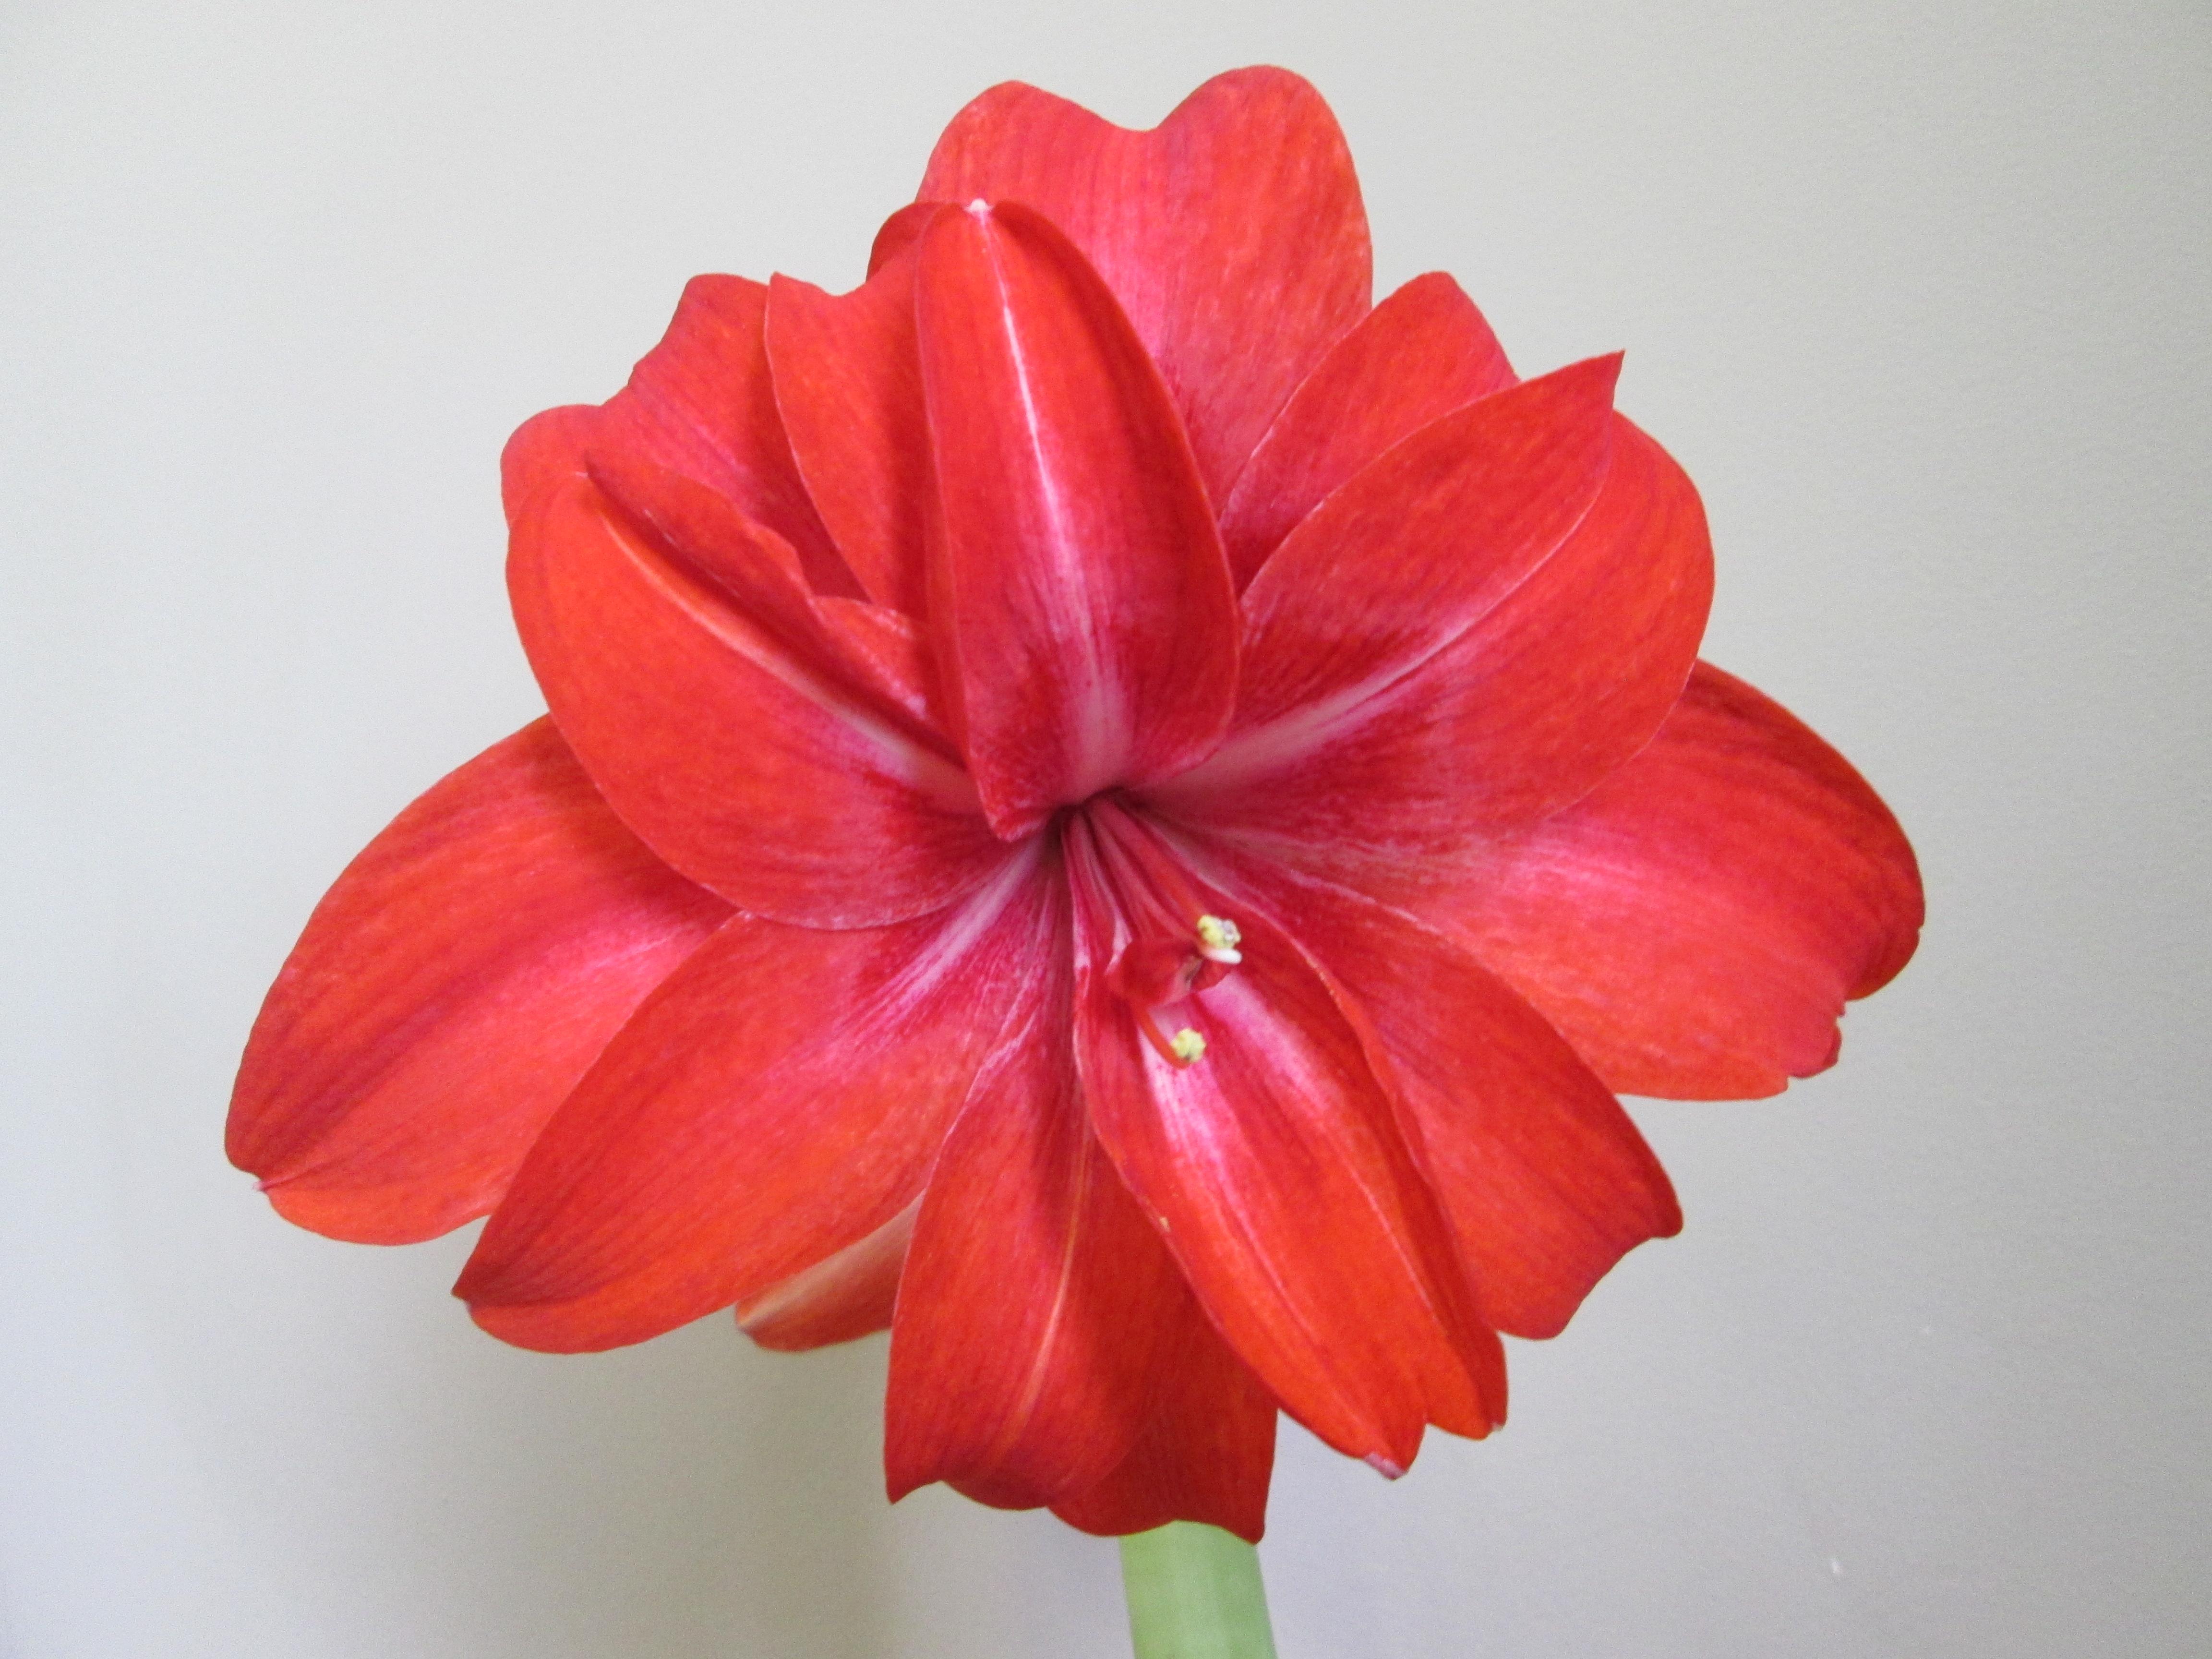 Hippeastrum Holland 'Red Nymph' - Amaryllis (Shipping begins Oct. 2021) from Leo Berbee Bulb Company